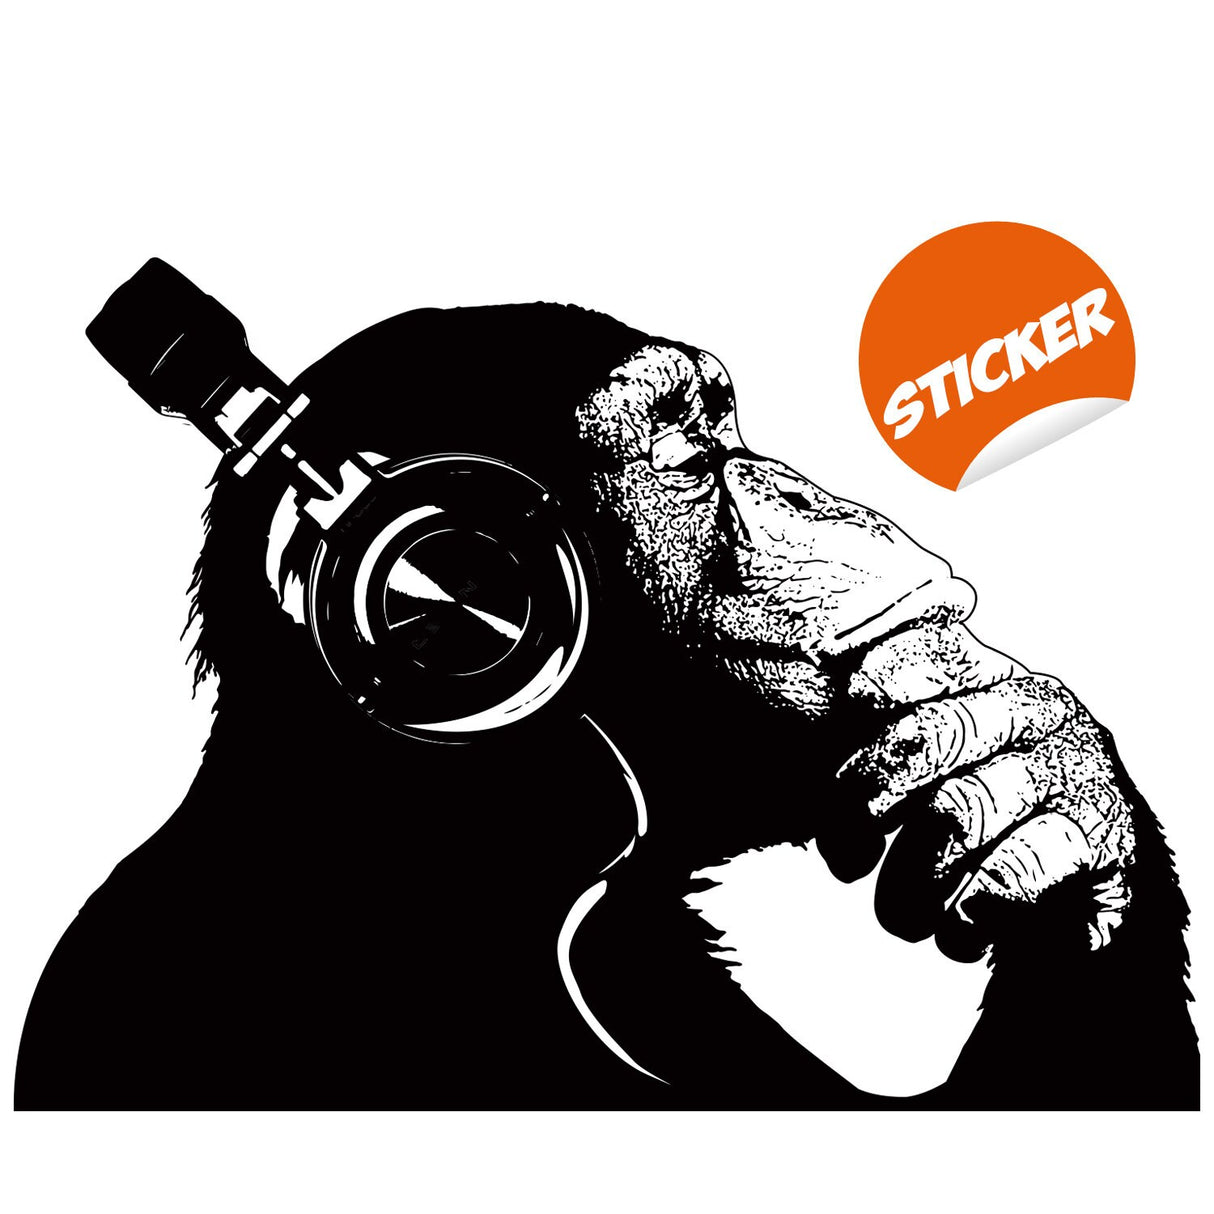 Banksy Wall Decal Thinking Monkey Art Sticker - Dj Chimp The Thinker Gorilla With Headphones Home Decals